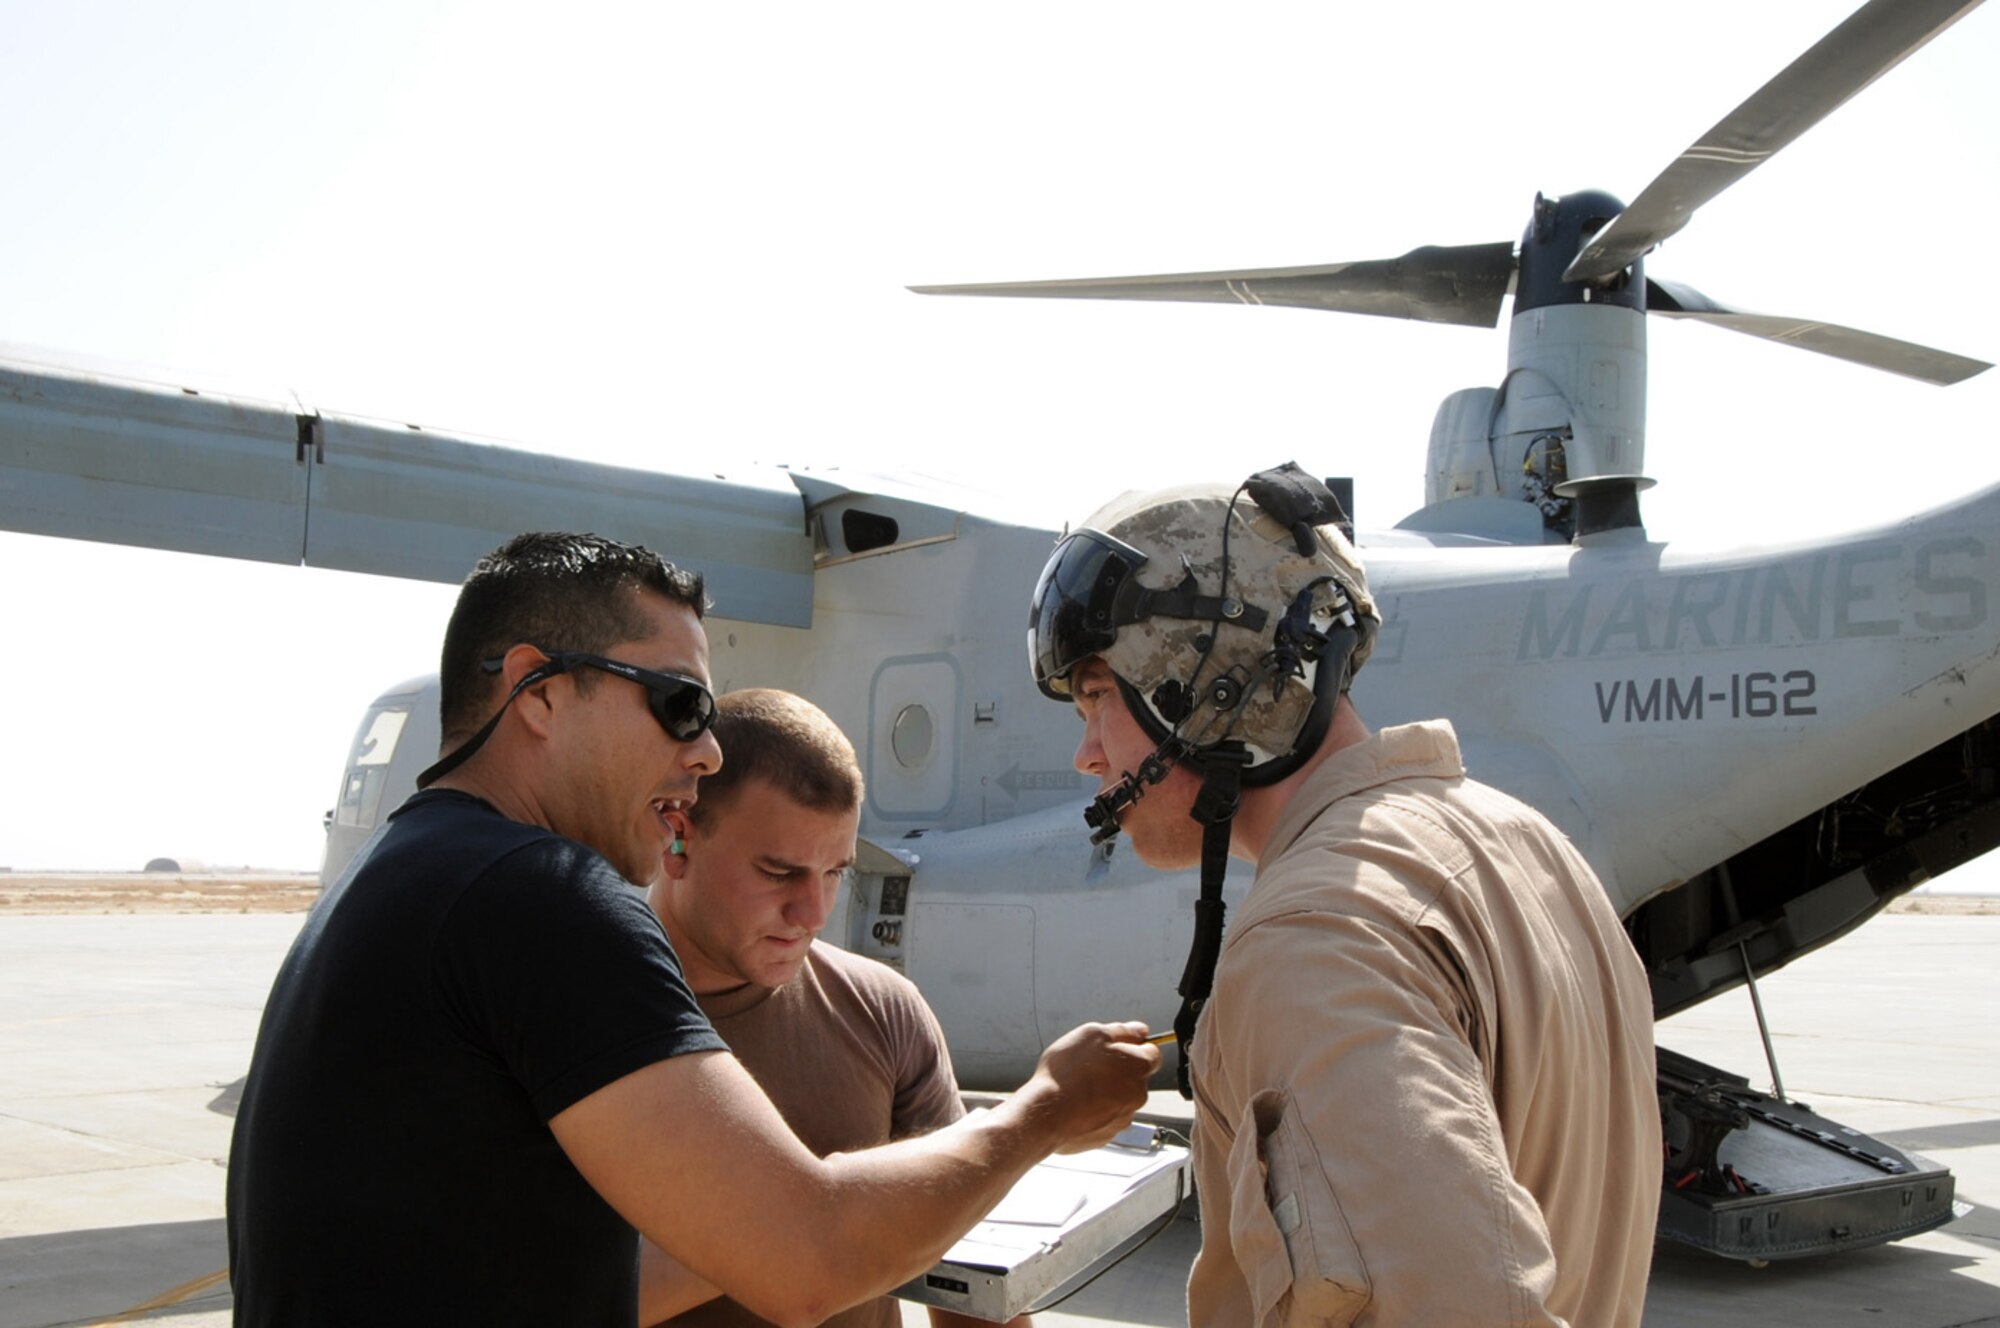 ALI BASE, Iraq -- Tech. Sgt. Frank Berrones and Senior Airman Matthew Lawson, 407th Expeditionary Logistics Readiness Squadron refueling unit operators, explain to Marine Sgt. Tim Greer, of the Marine Medium Tiltrotor Squadron 162 (VMM-162), procedures for refueling the V-22 Osprey here April 24.  The Petroleum, Oil and Lubricants section refuels various cargo aircraft from around the Area of Responsibility. Sergeant Berrones is deployed from Spangdahlem AB, Germany and Airman Lawson is deployed from Ramstein Air Base, Germany.